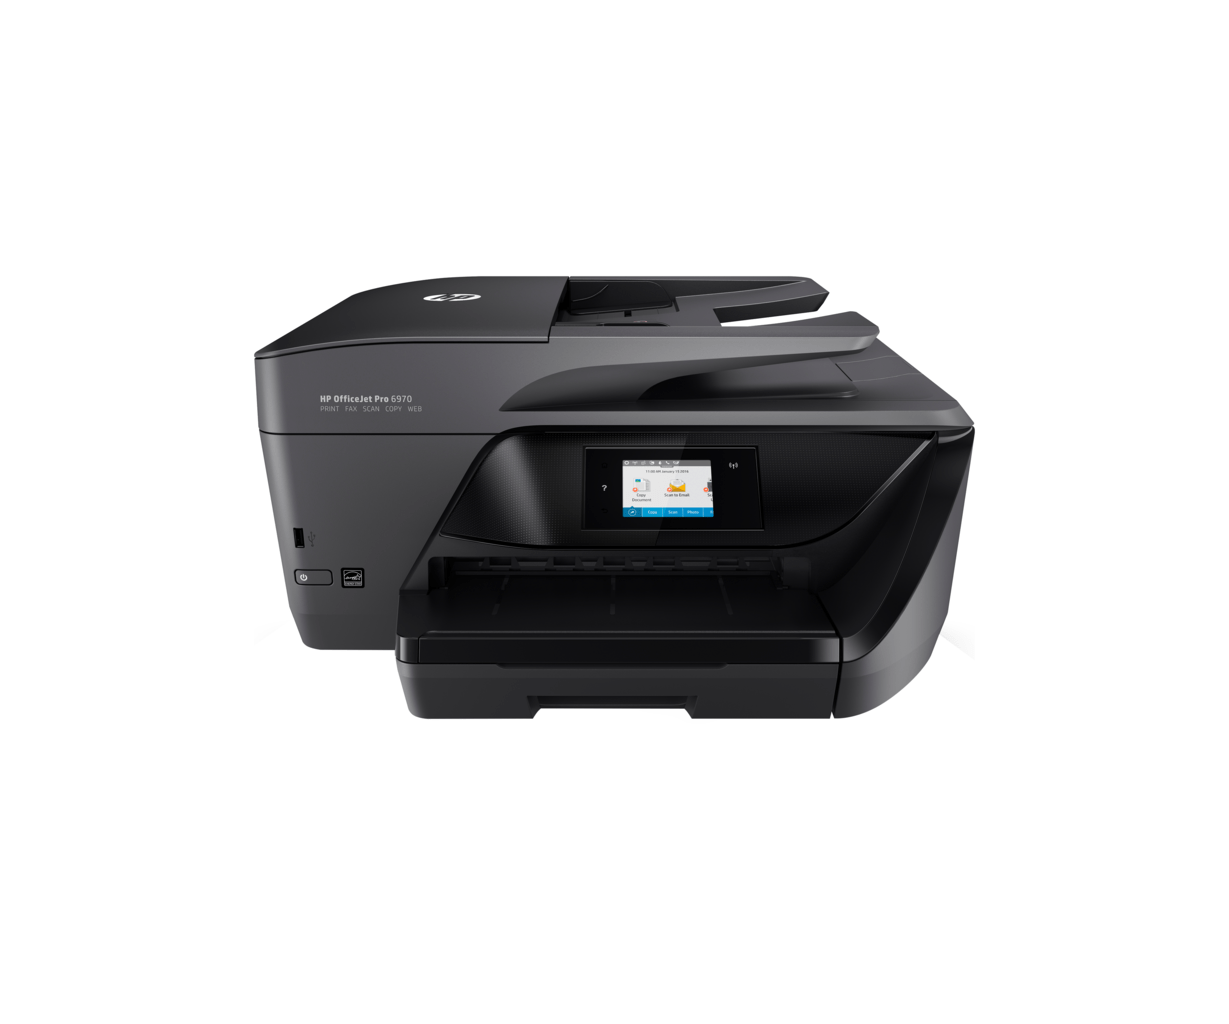 HP OfficeJet Pro 6970 All in One Printer